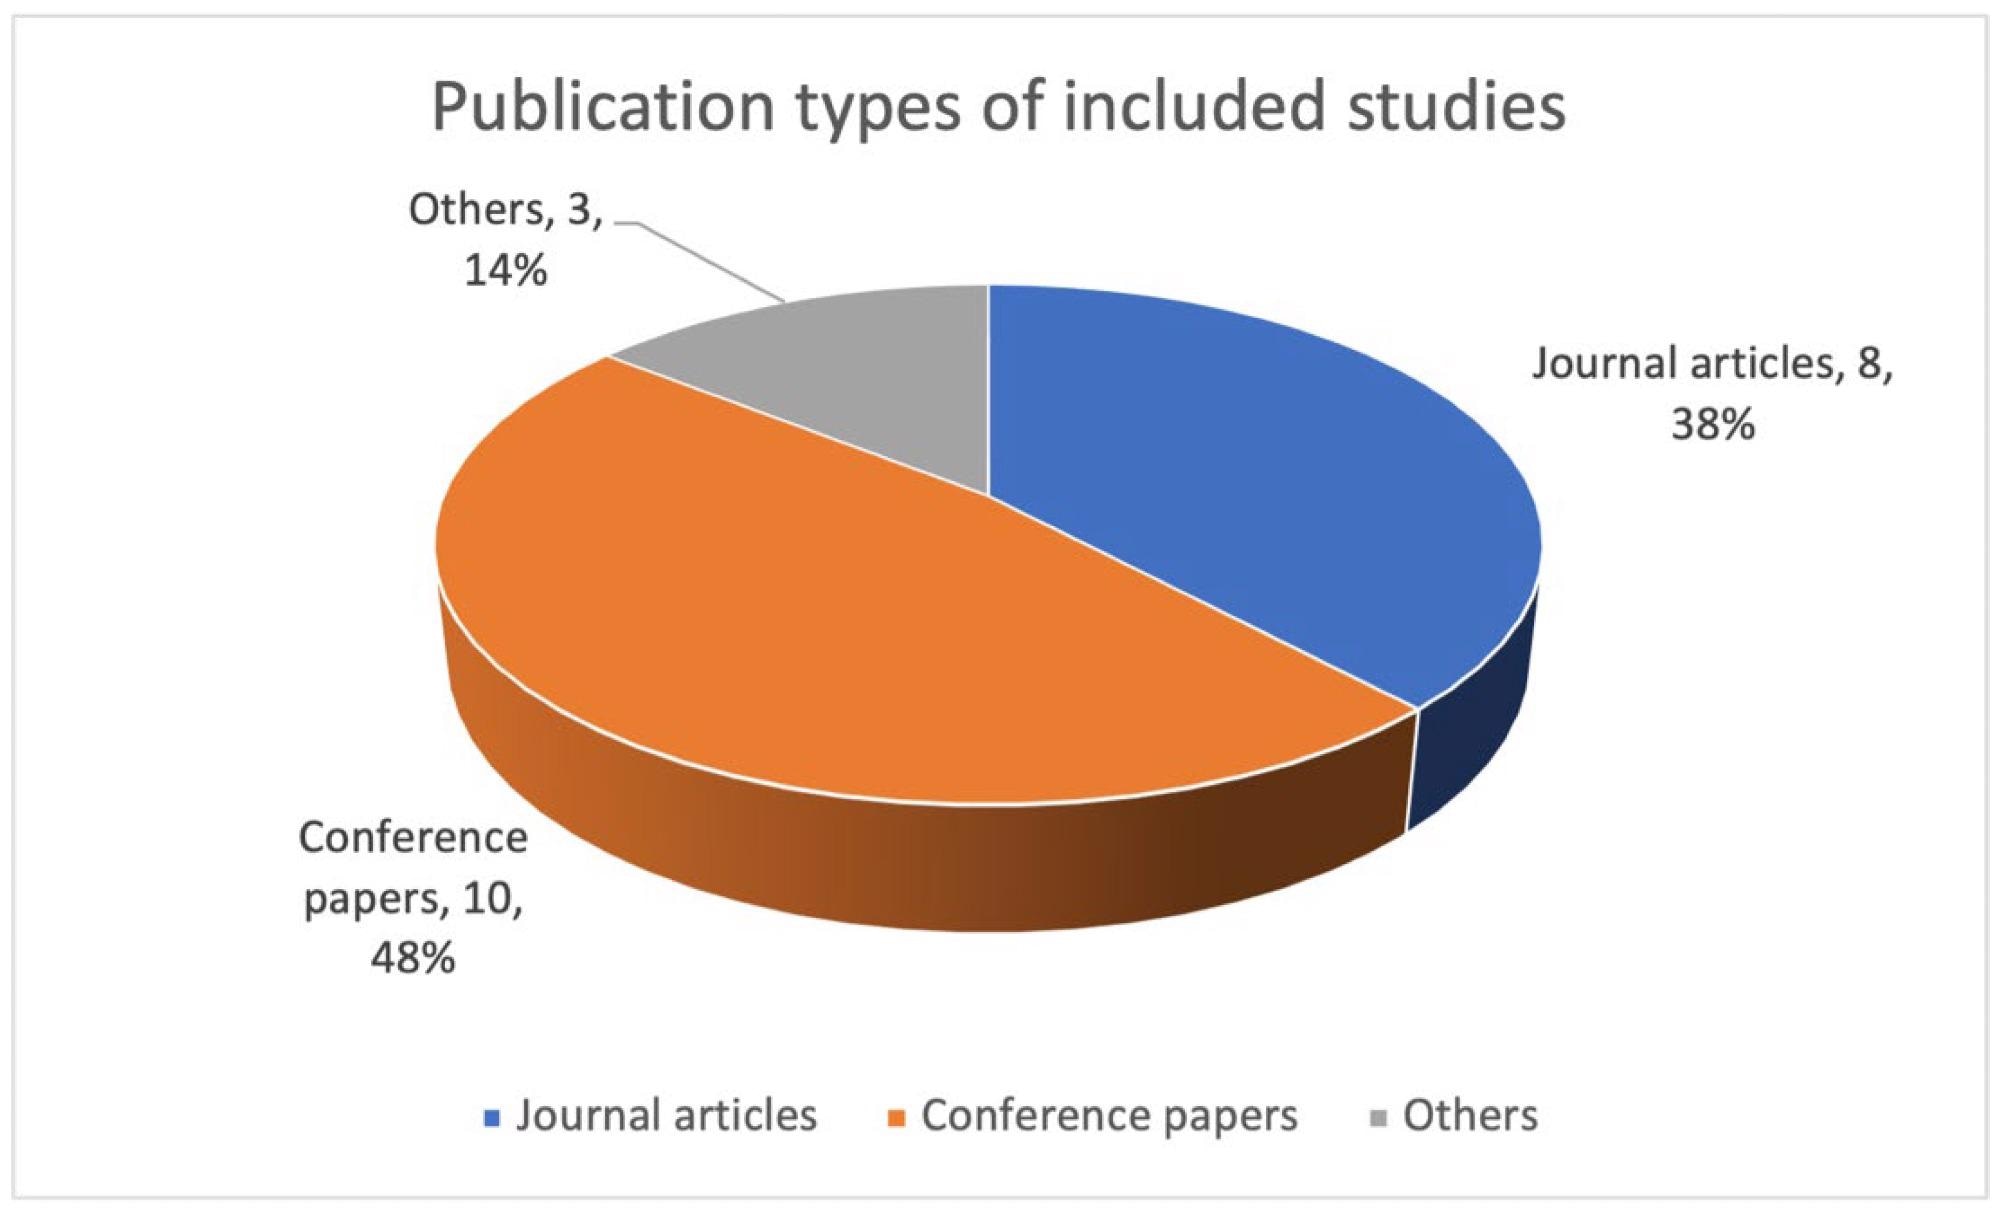 Distribution of included studies by publication types.